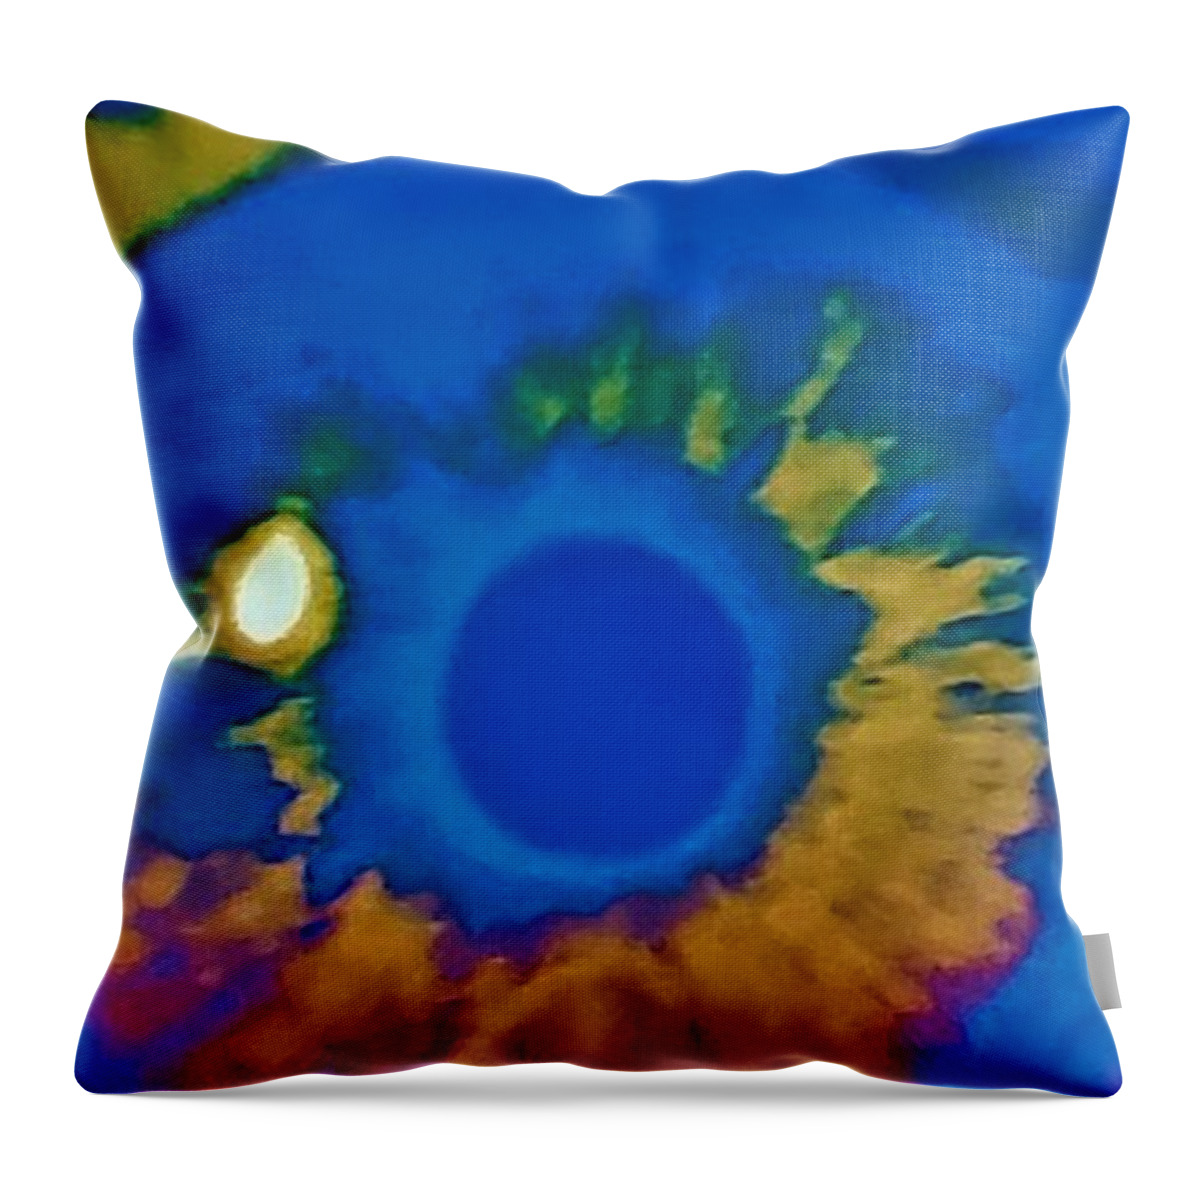 2001 A Space Odyssey Throw Pillow featuring the photograph 2001 Eyeball Blue Golden by Rob Hans